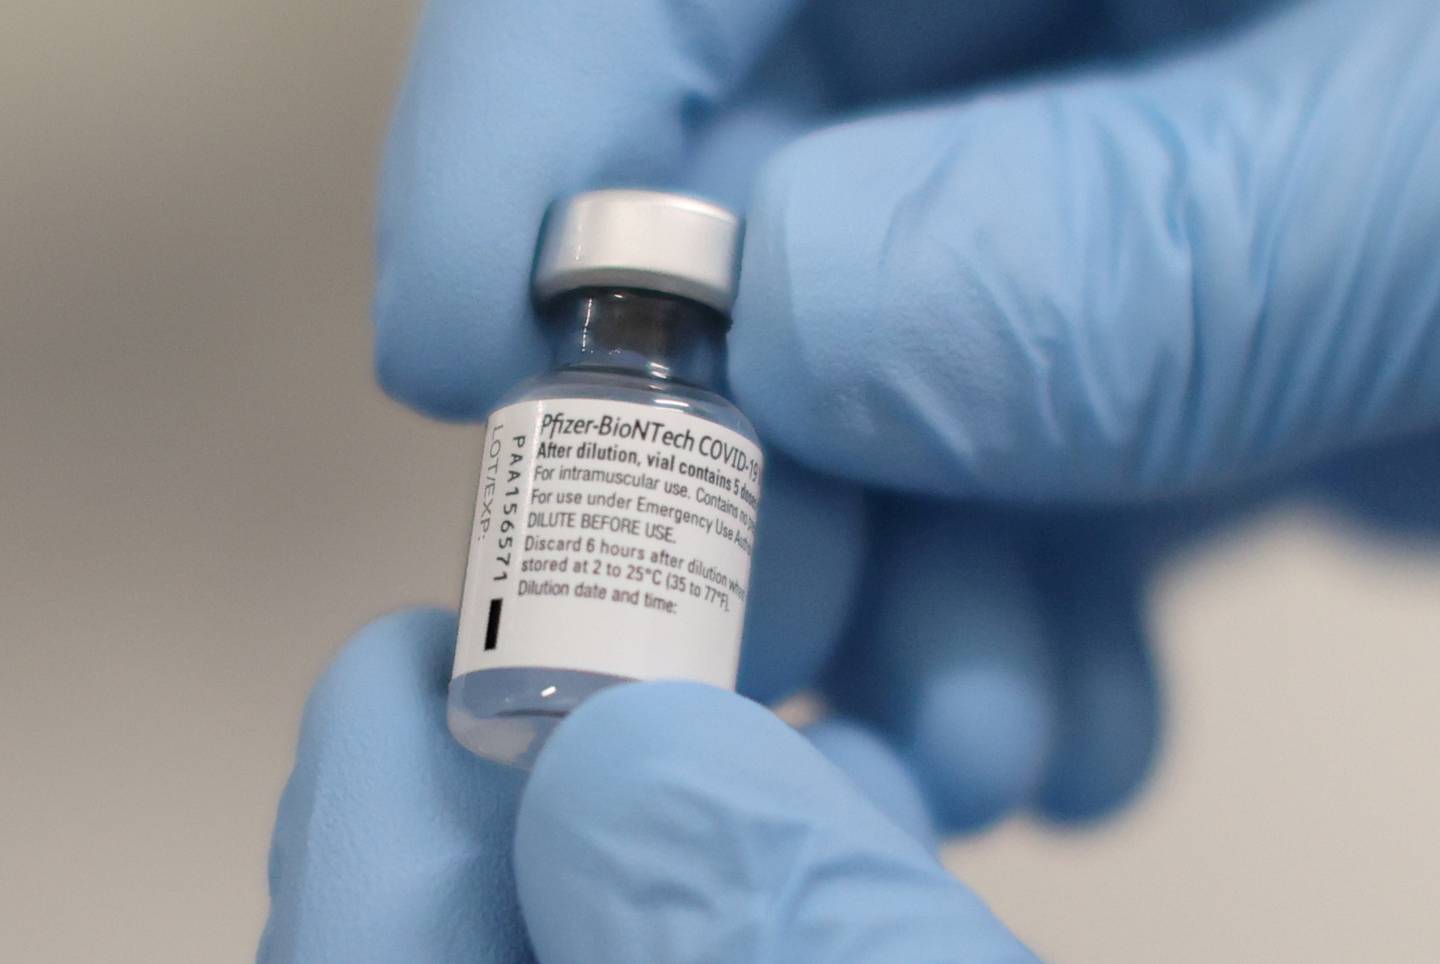 FILE PHOTO: A vial of the Pfizer/BioNTech COVID-19 vaccine is seen ahead of being administered at the Royal Victoria Hospital  in Belfast, Northern Ireland December 8, 2020. Liam McBurney/Pool via REUTERS/File Photo